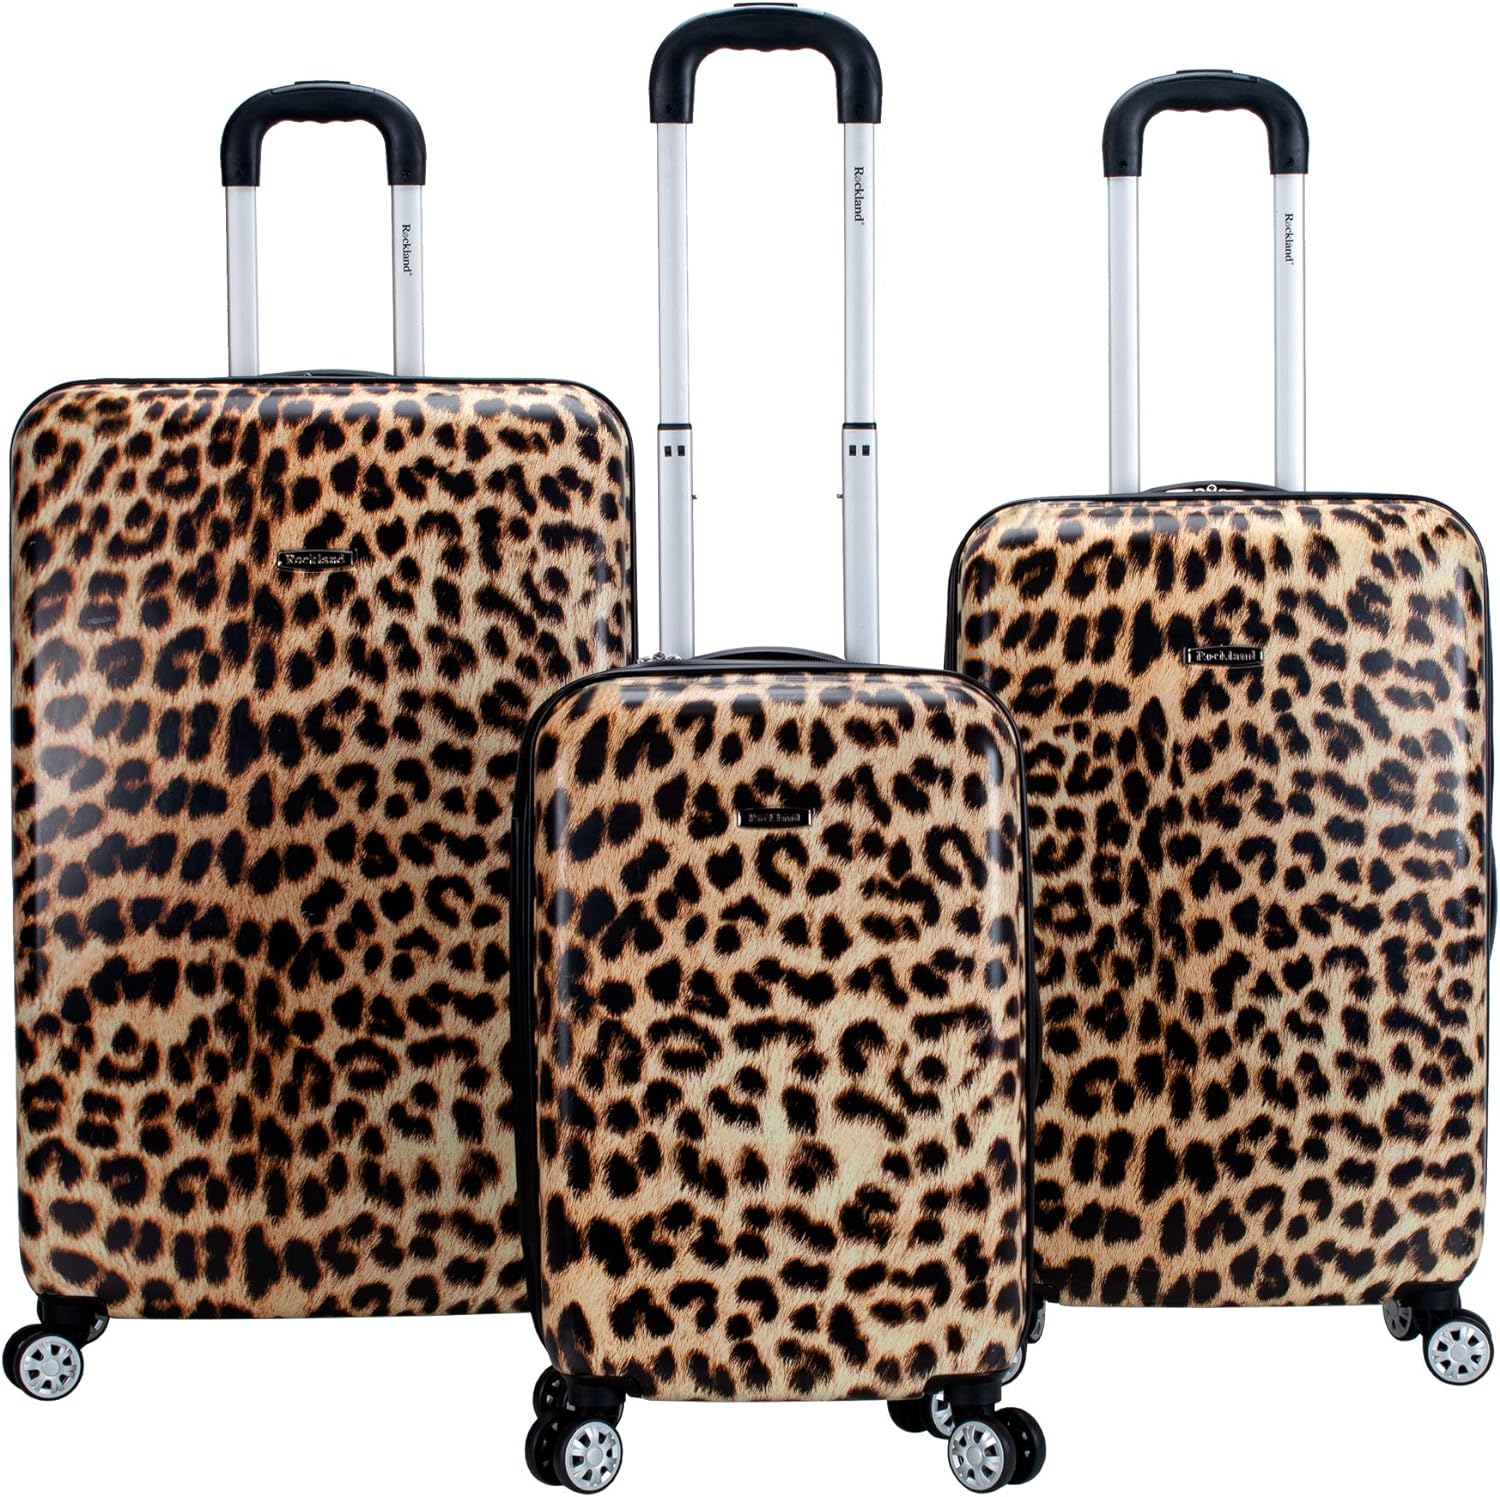 You are currently viewing Leopard Luggage Set – Lightweight and Durable Spinner Wheel for Travelers!